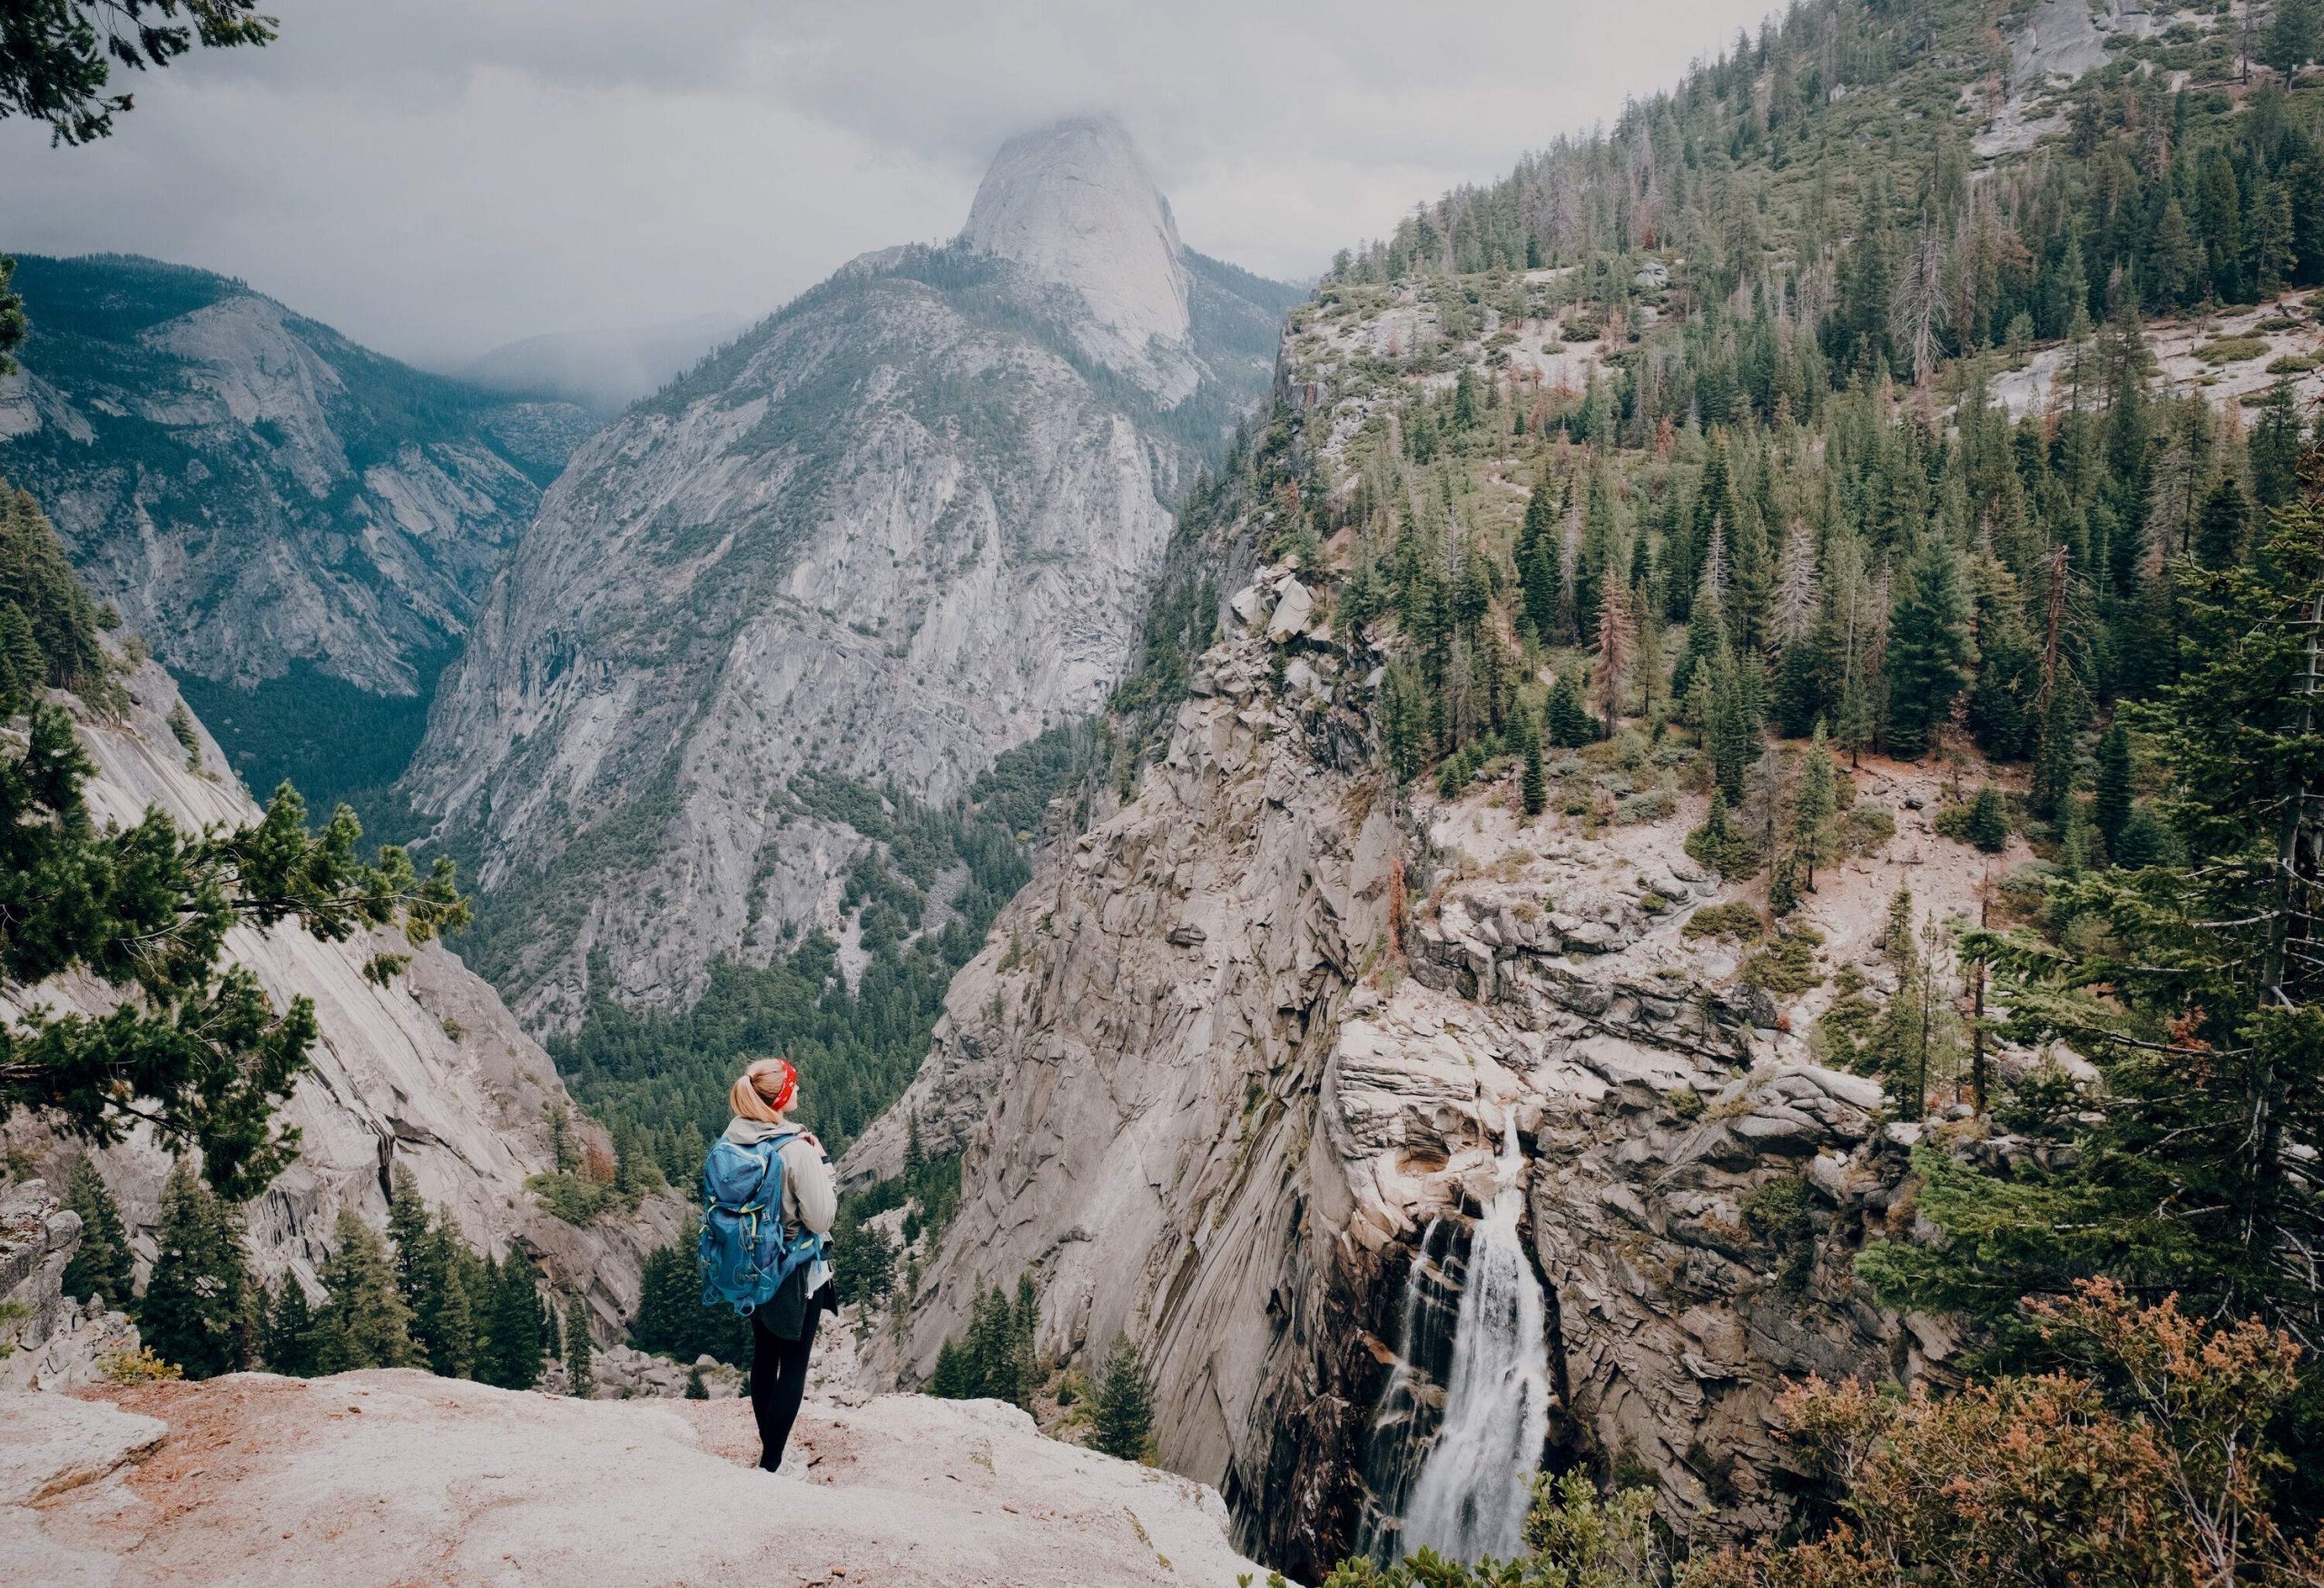 A person with a backpack stands on the edge, gazing at the majestic tree-topped, rugged mountains that lie ahead.